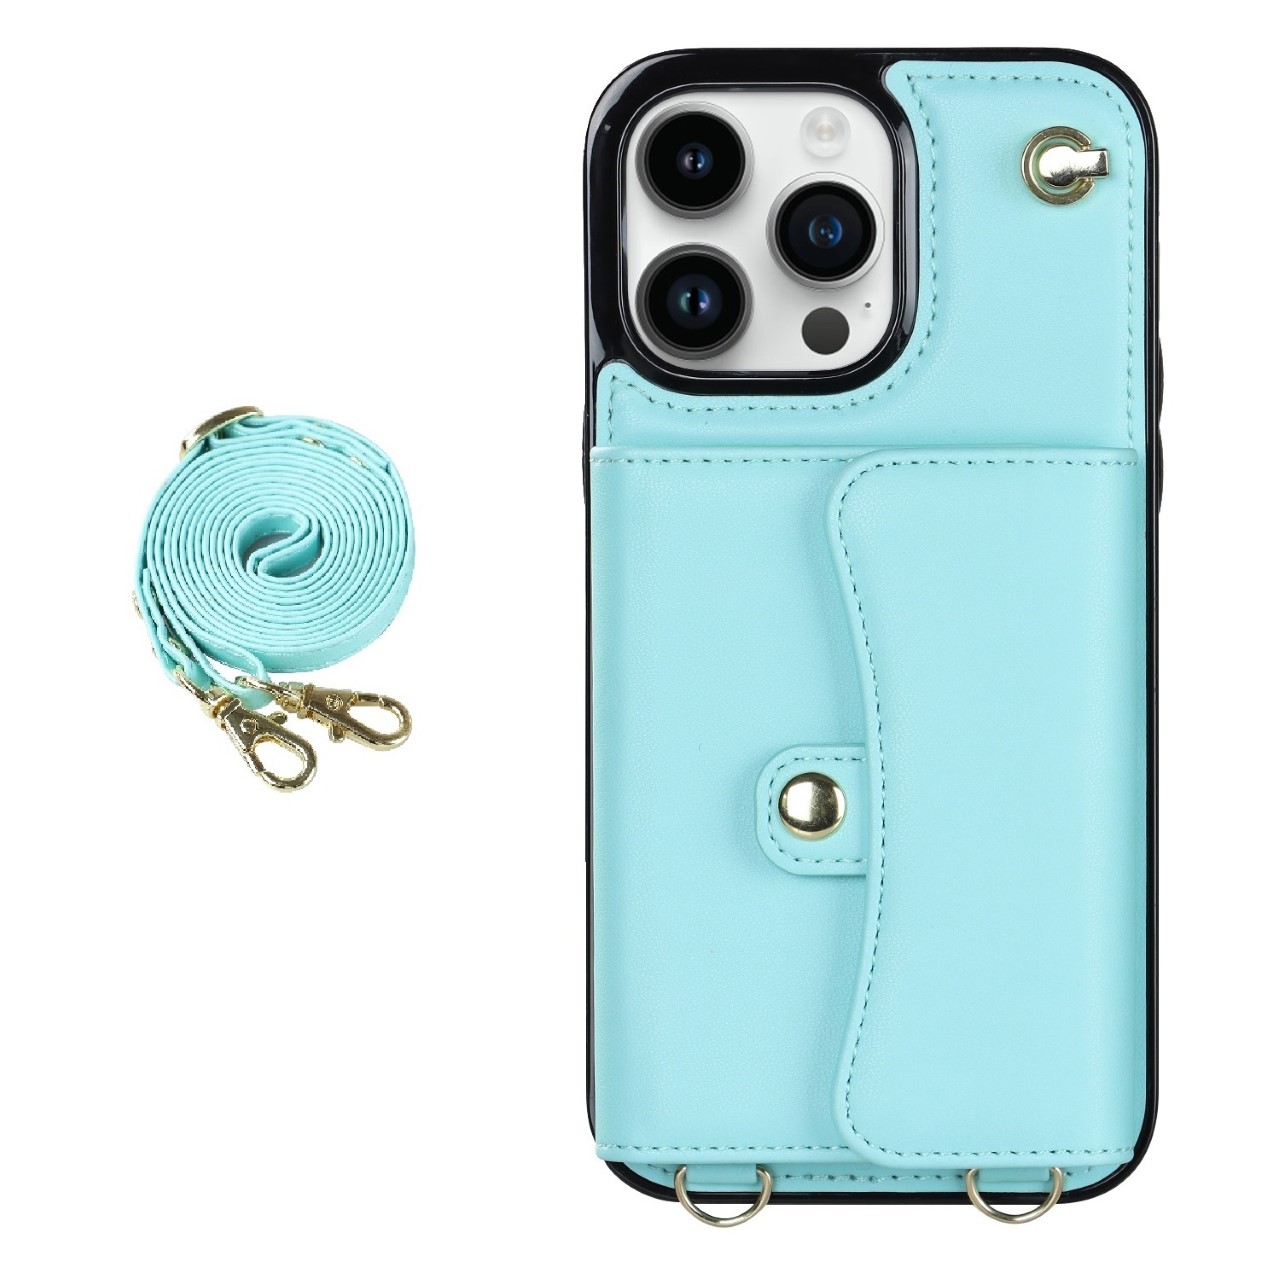 Samsung Galaxy A71 Back Cover Hoesje met Koord - Back Cover - Kunstleer - Pasjeshouder - Koord - Samsung Galaxy A71 - Lichtblauw